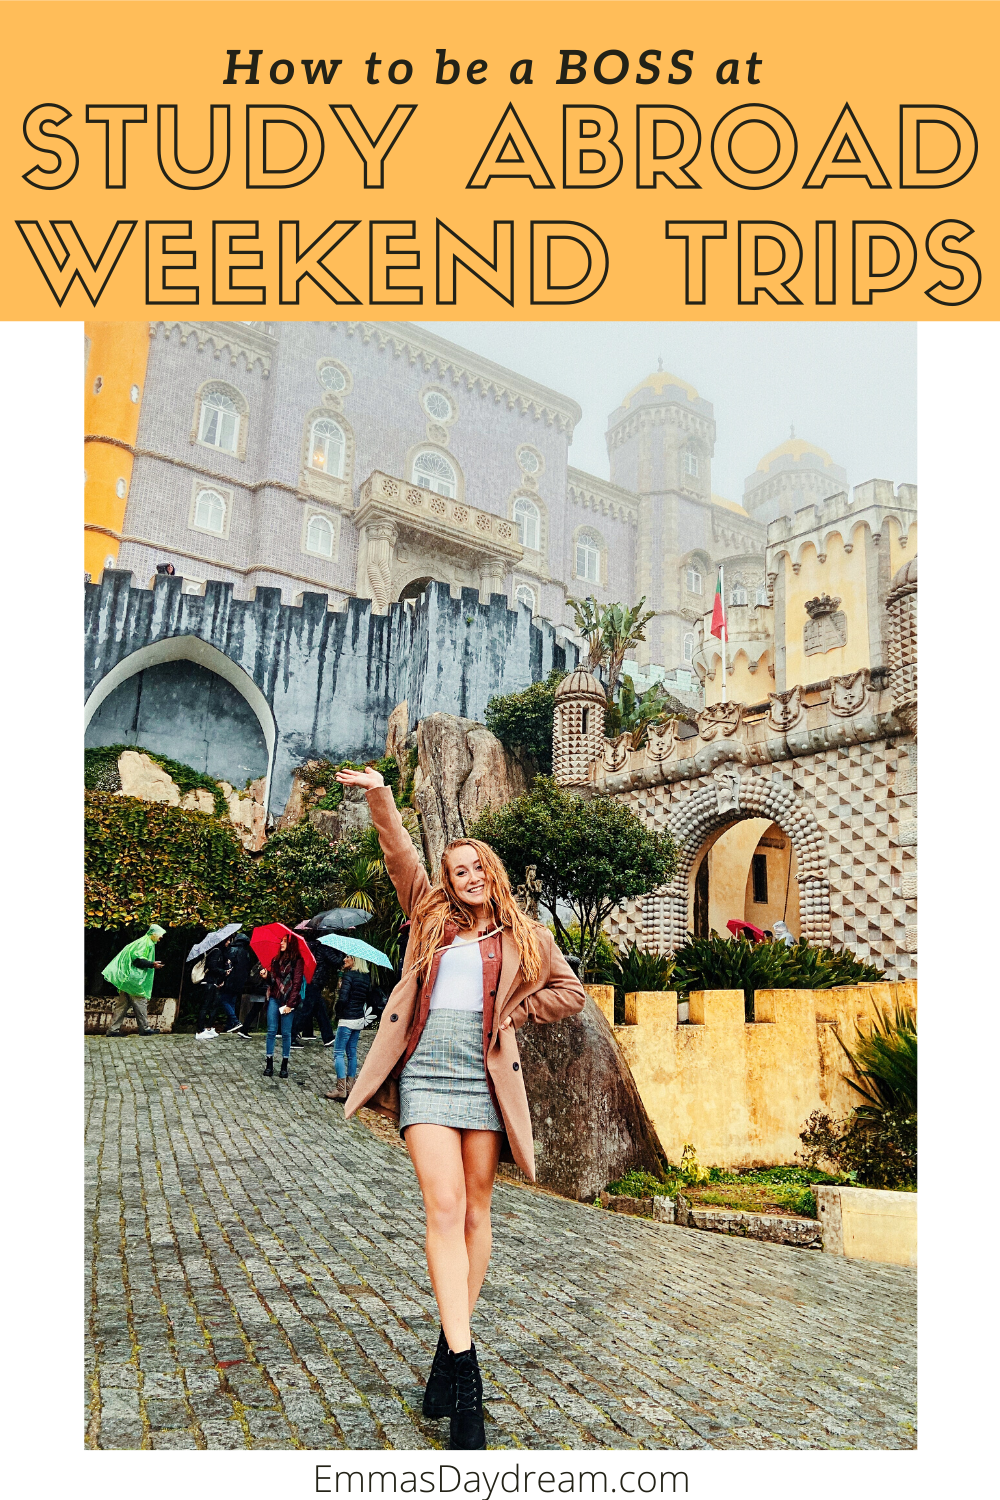 Everything you need to know about study abroad weekend trips. How to be a boss at study abroad weekend trips. The ultimate guide to going on weekend trips while studying abroad. 